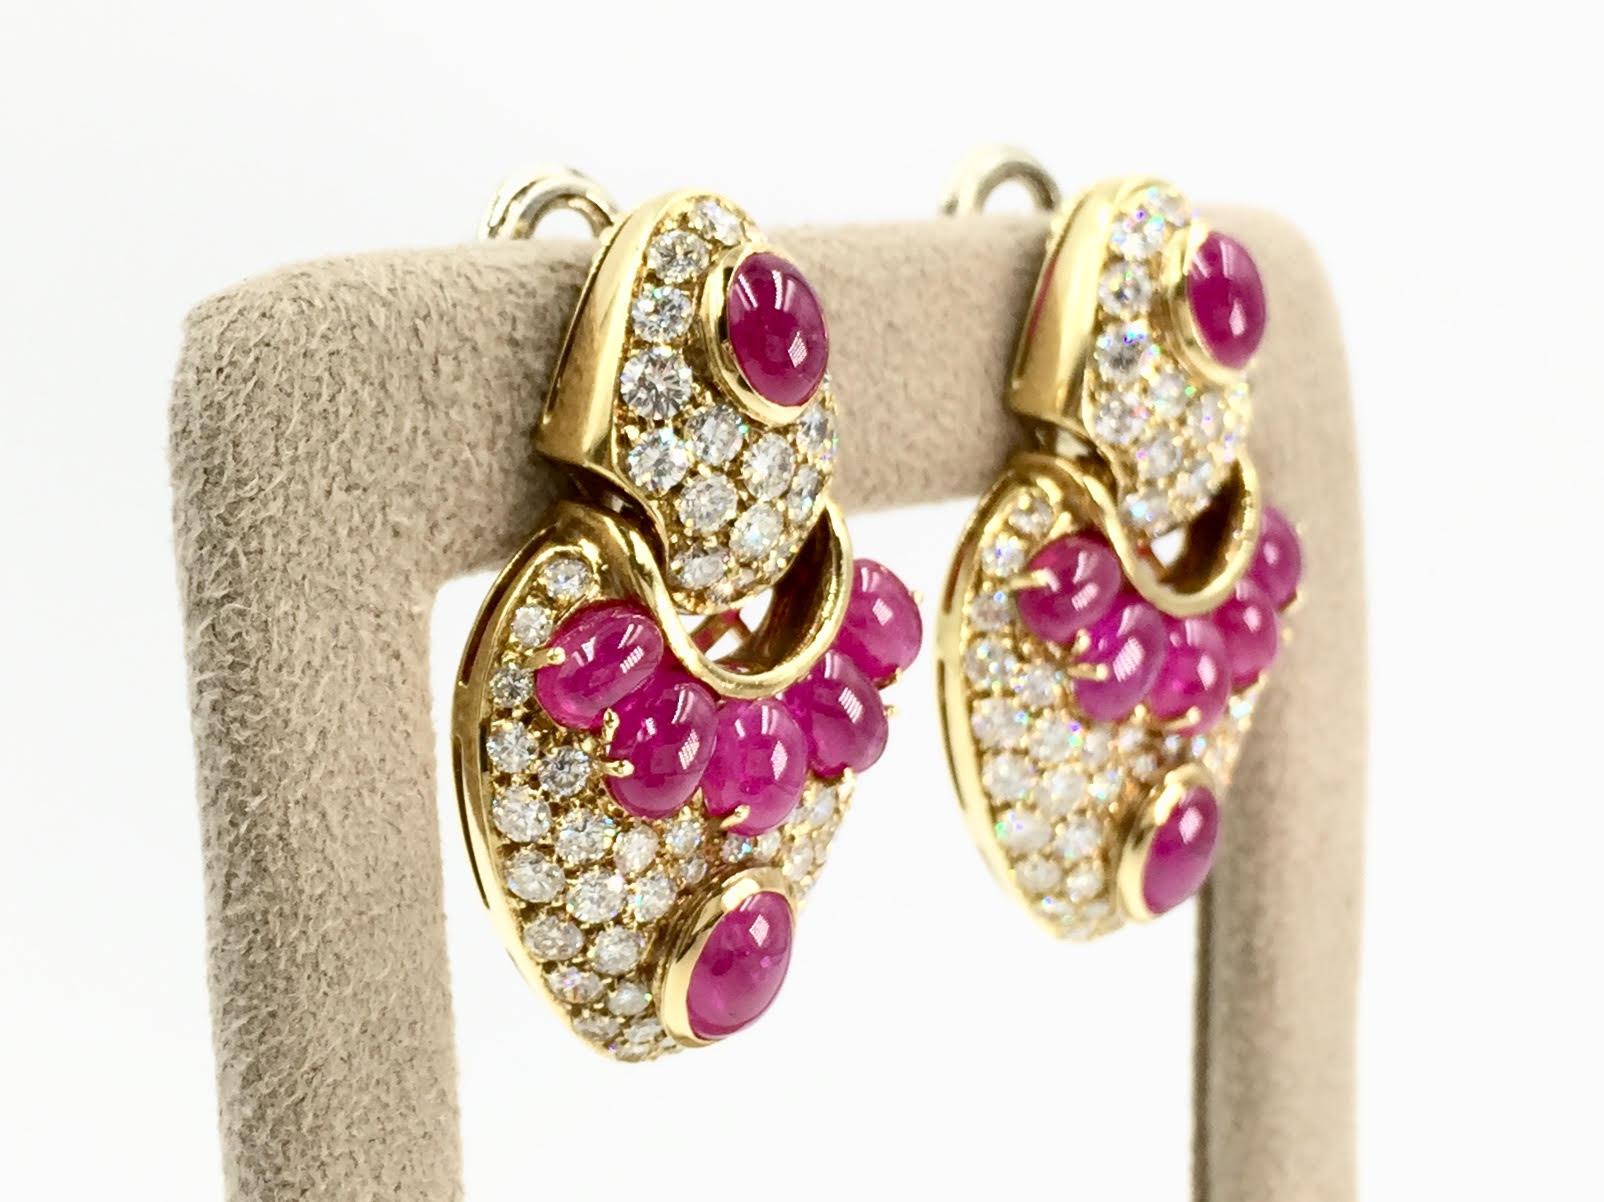 Gorgeous Italian made 18 karat drop earrings featuring 18.83 carats of vivid cabochon rubies and 5.87 carats of high quality white diamonds at approximately F color, VS2 clarity. Genuine rubies are rich in color with a purplish-red color and medium